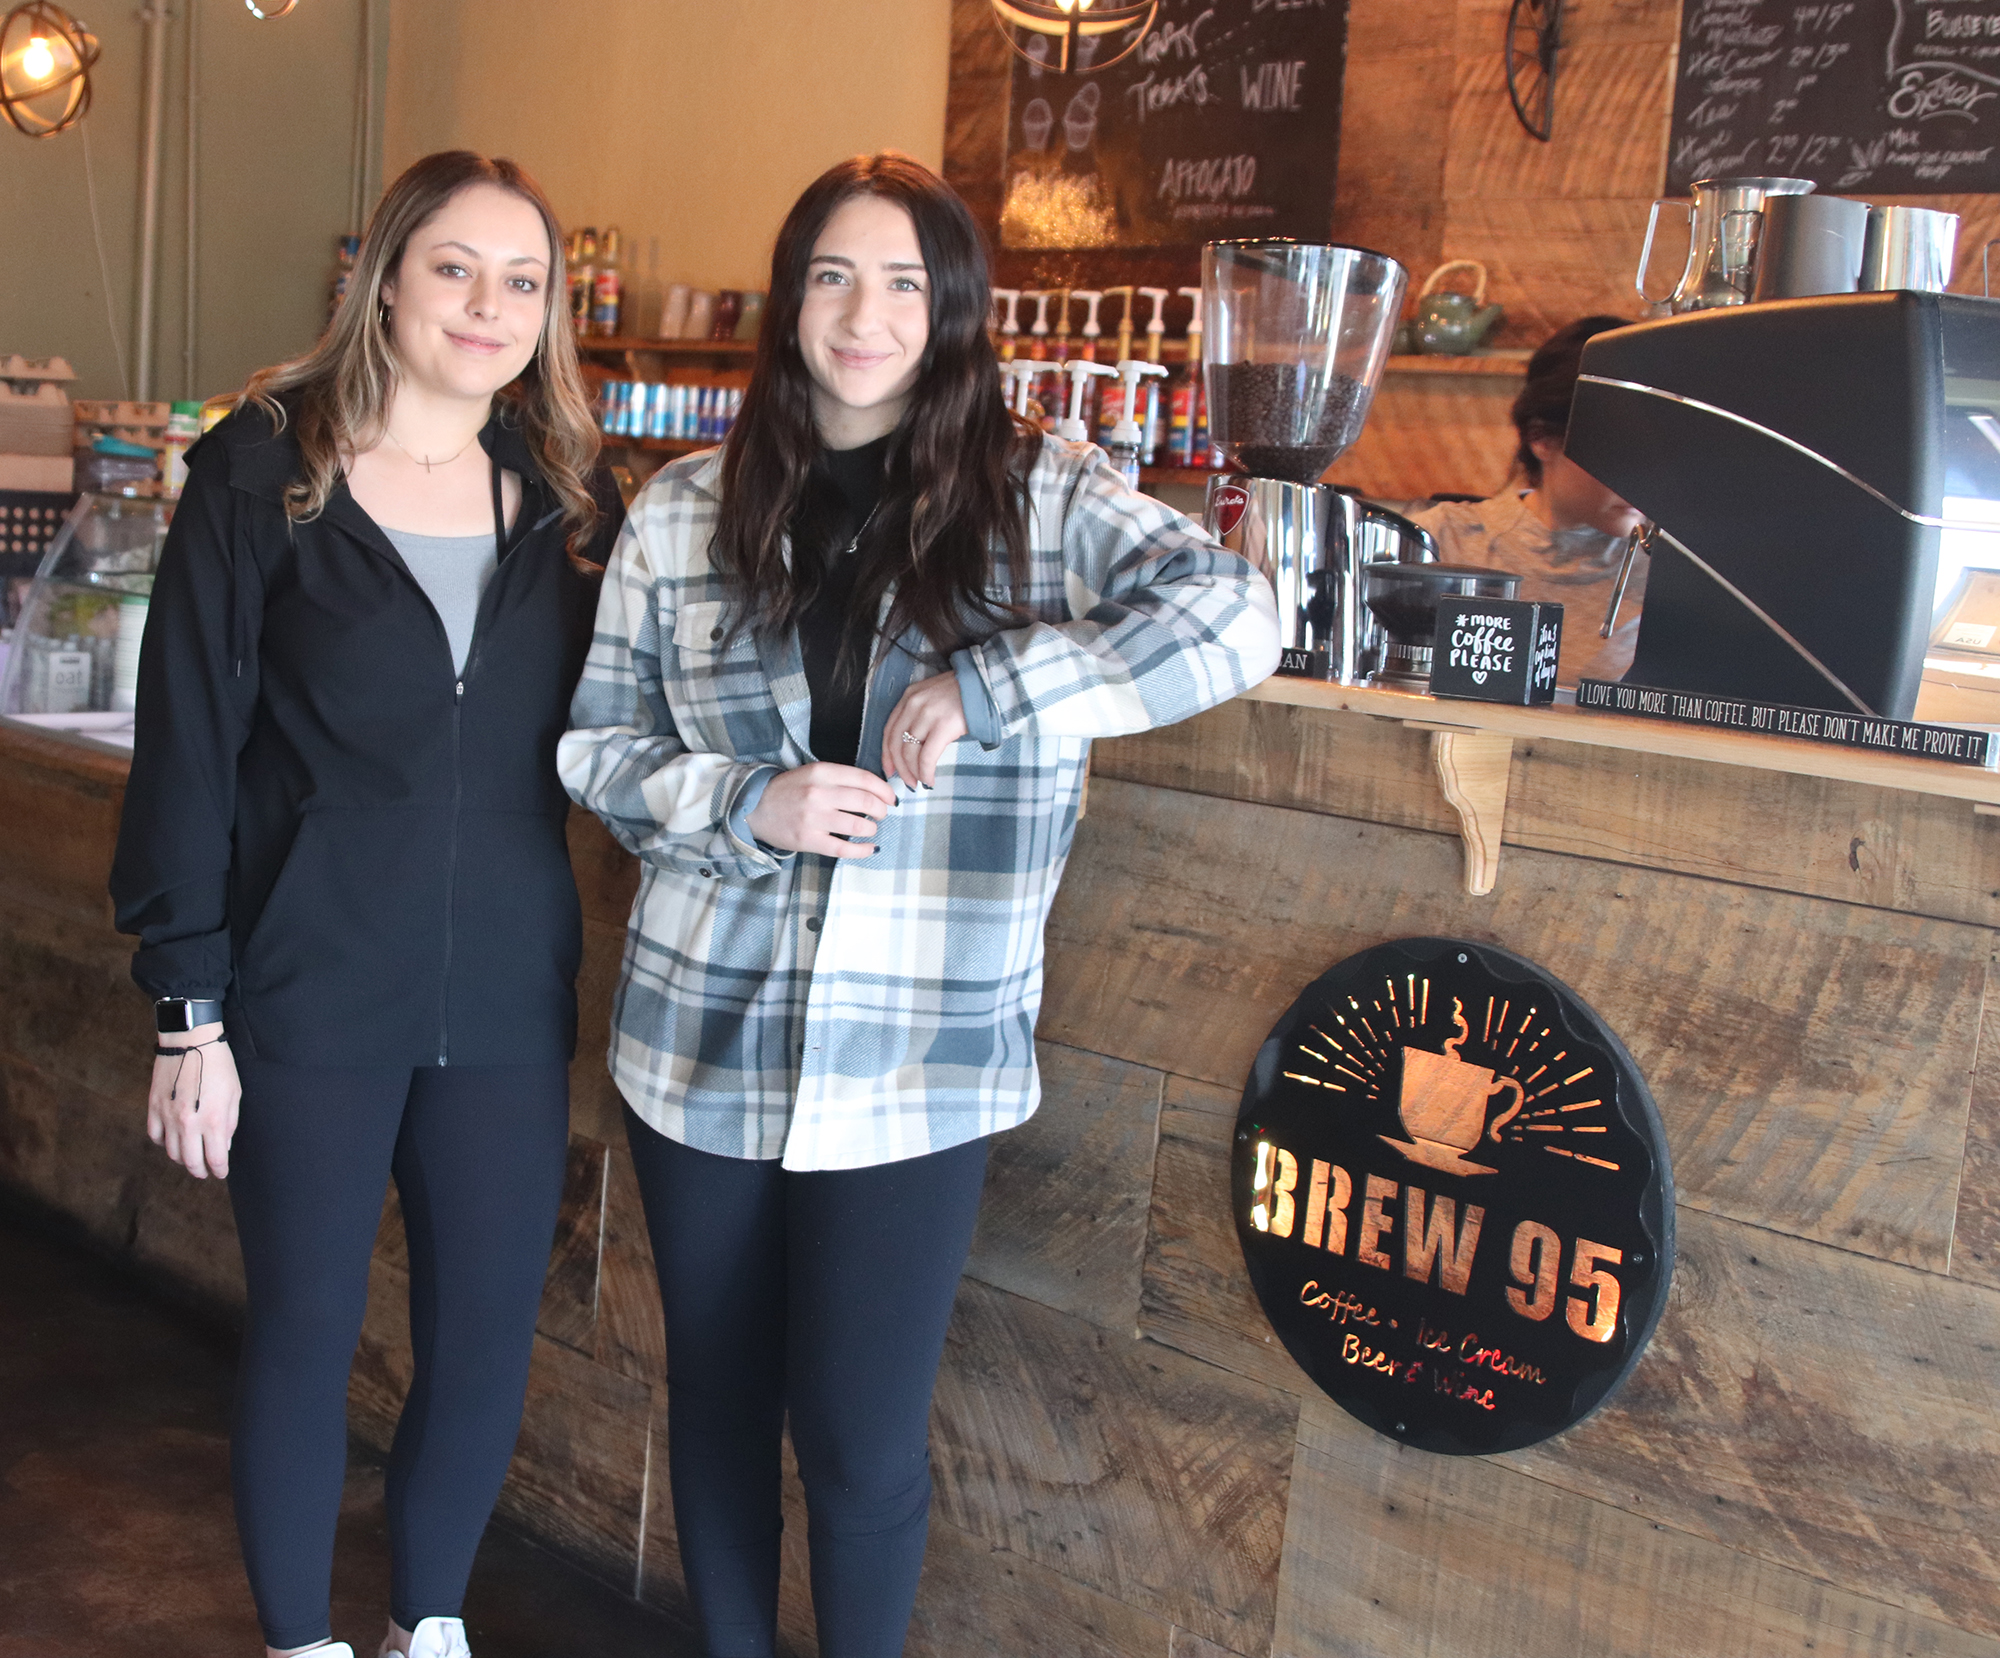 Kaytee Delany and Katie Cabada worked together throughout their senior year as baristas at Brew 95./ Kailey Franklin • The Brand